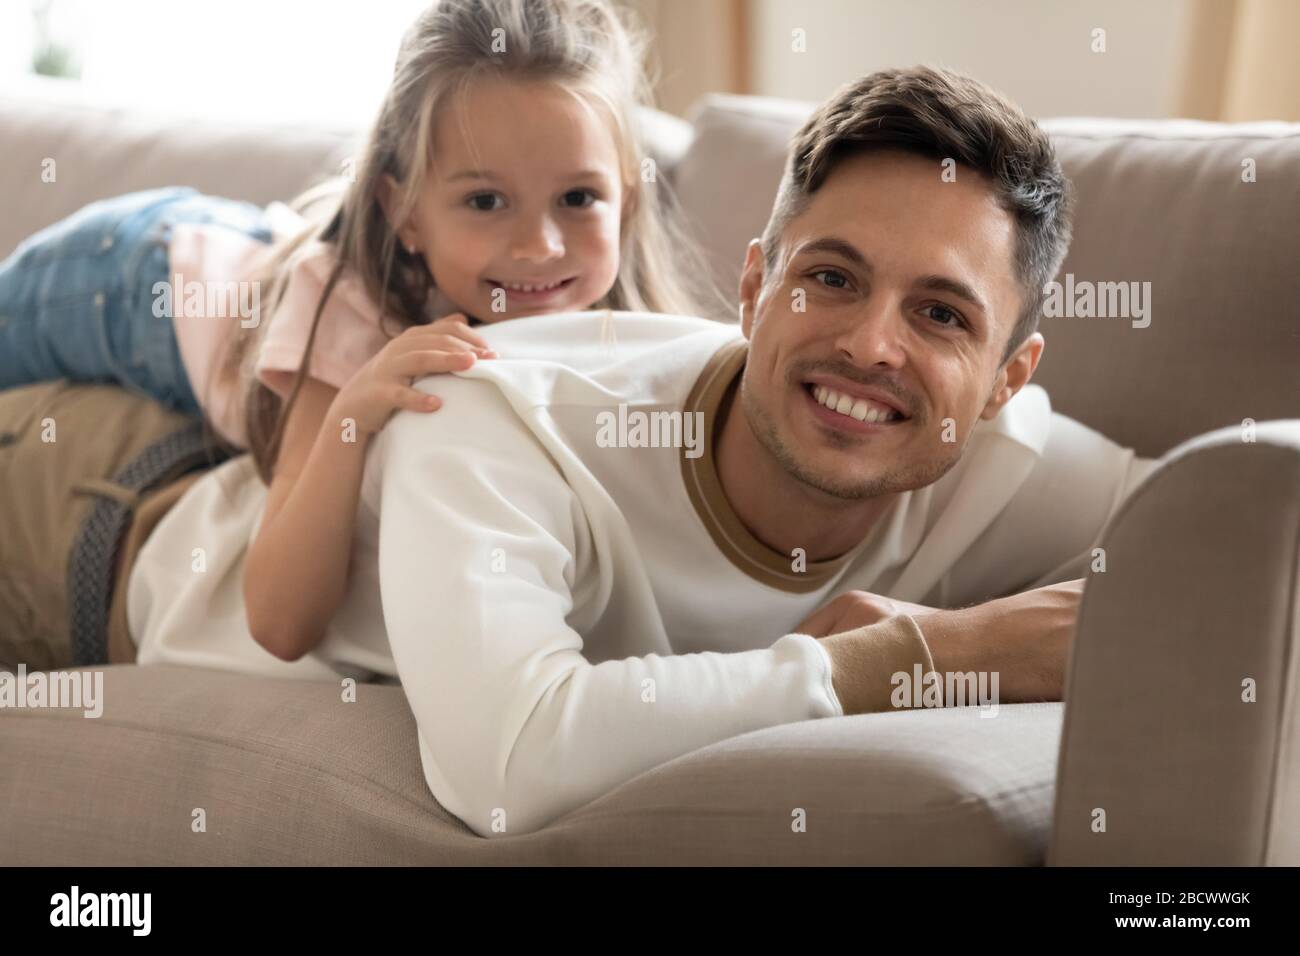 Happy young father lying on couch with smiling small daughter. Stock Photo